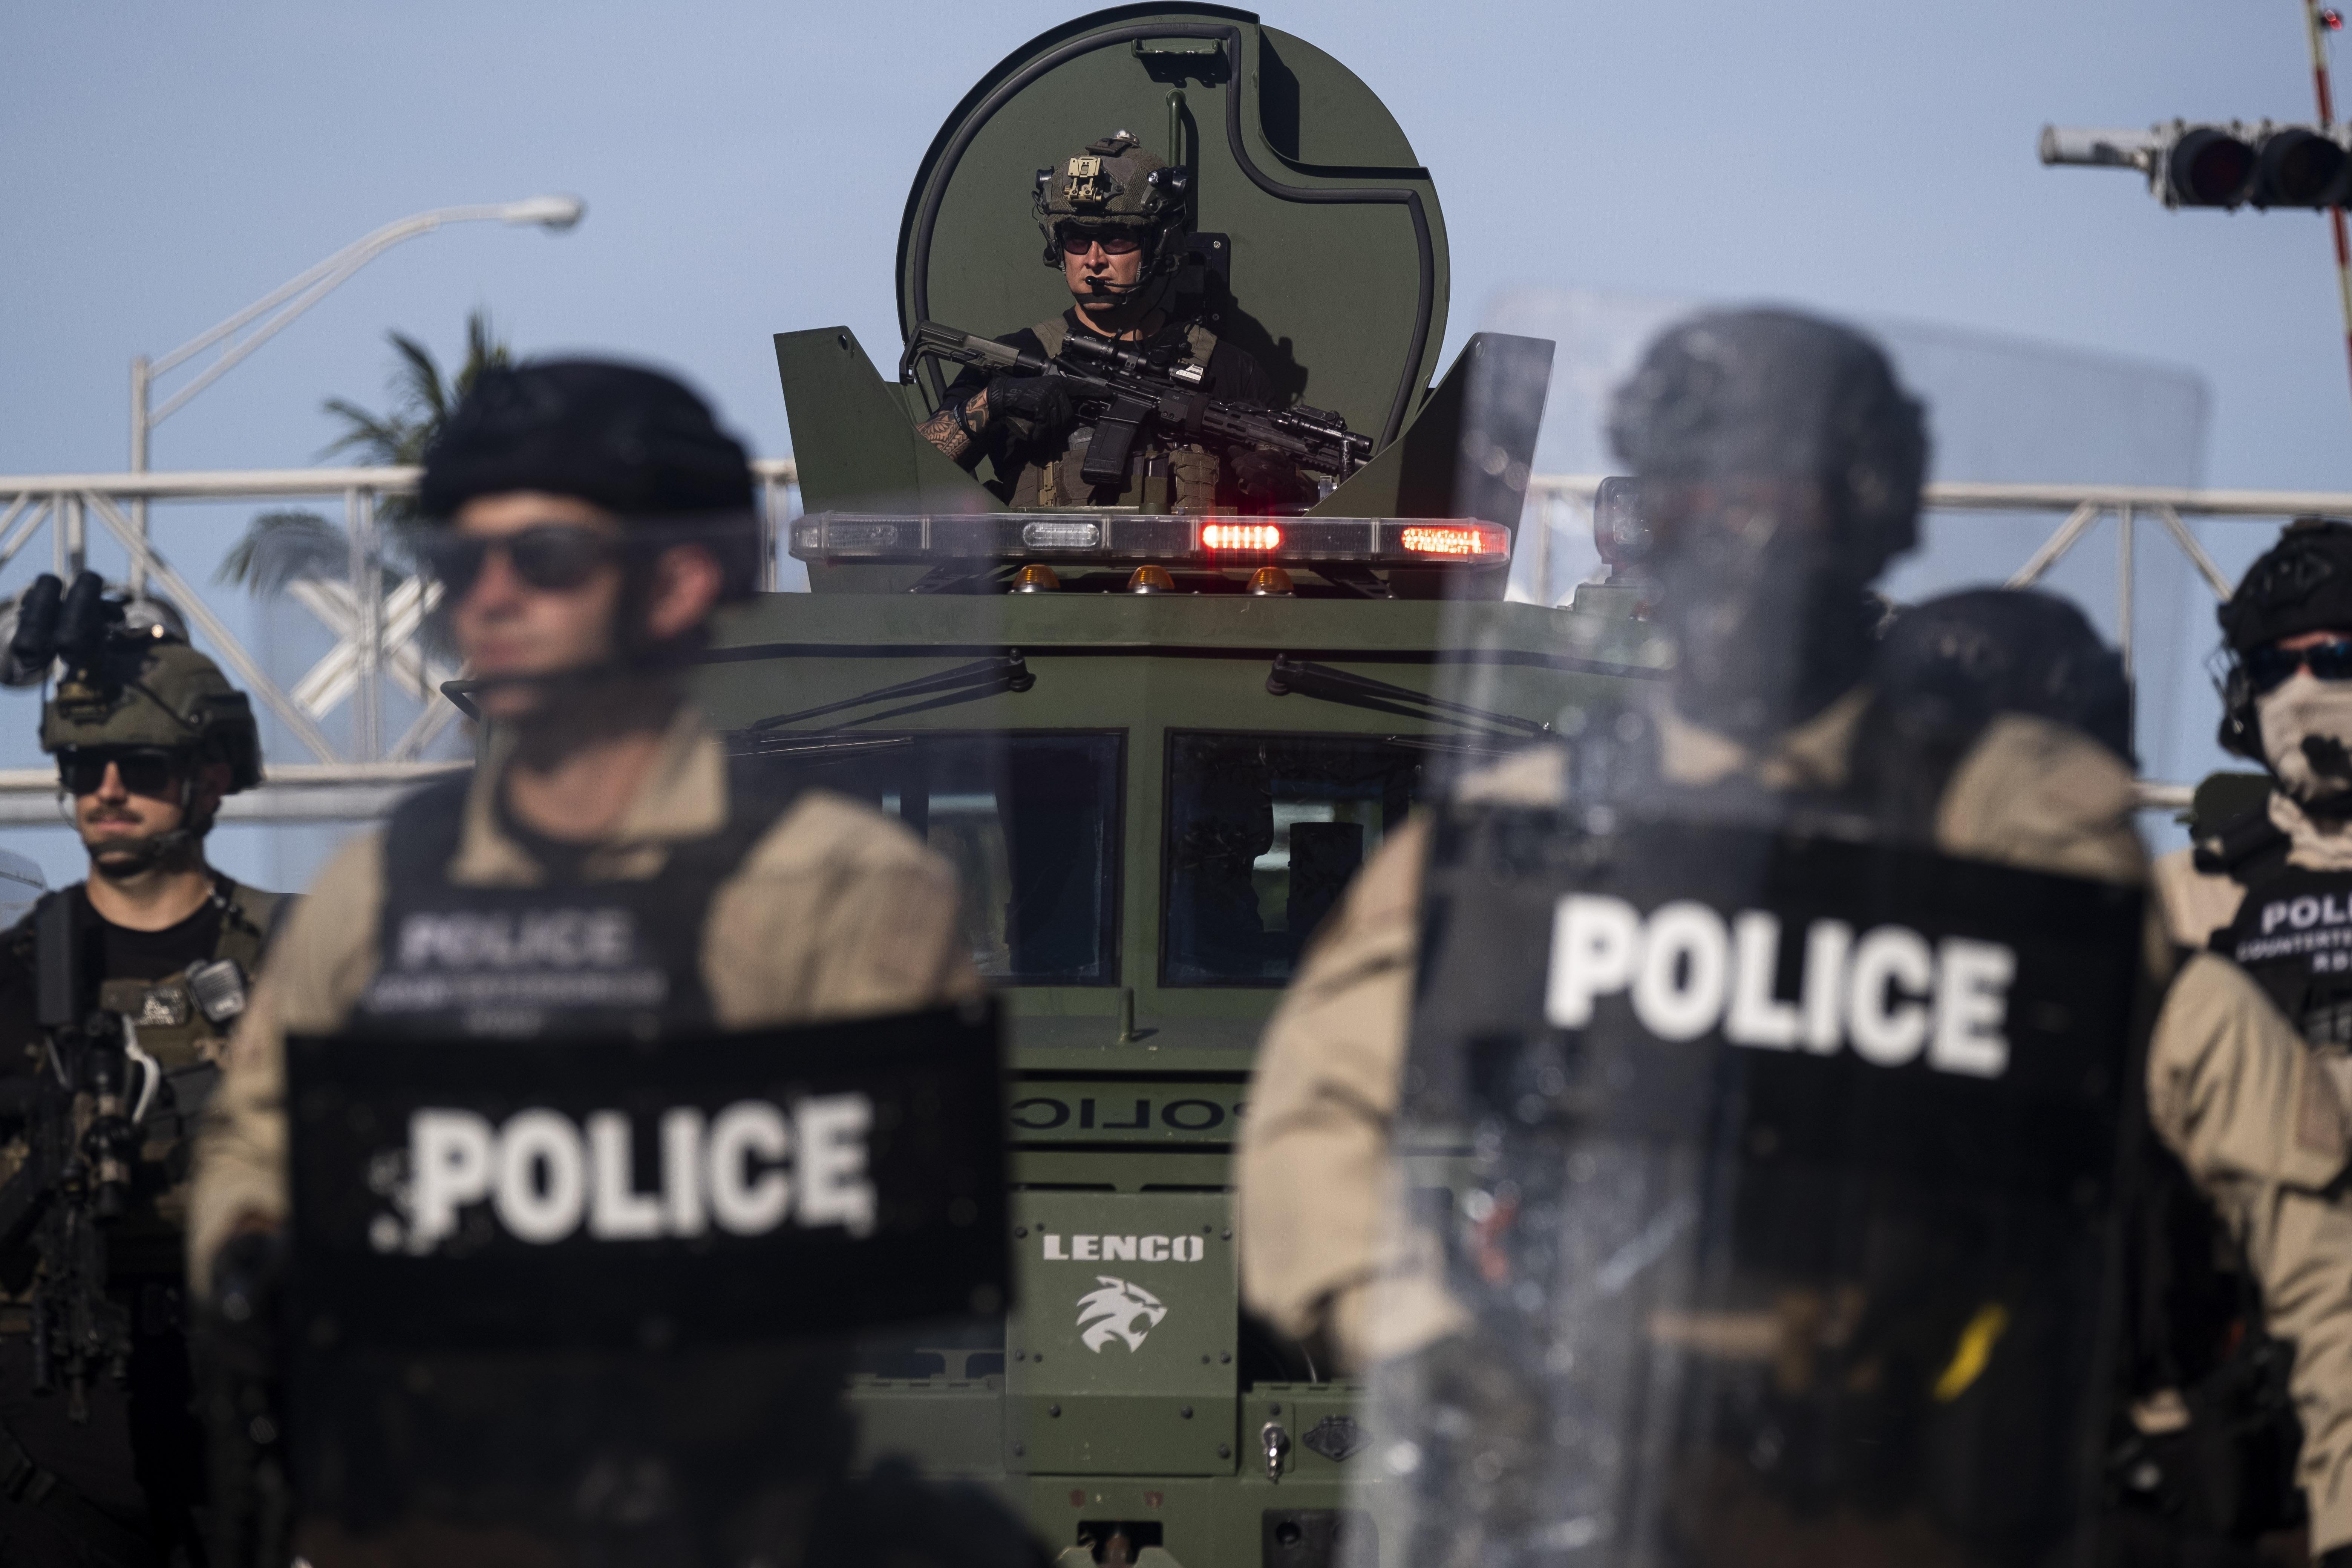 Police in riot gear stand in front of an armored vehicle